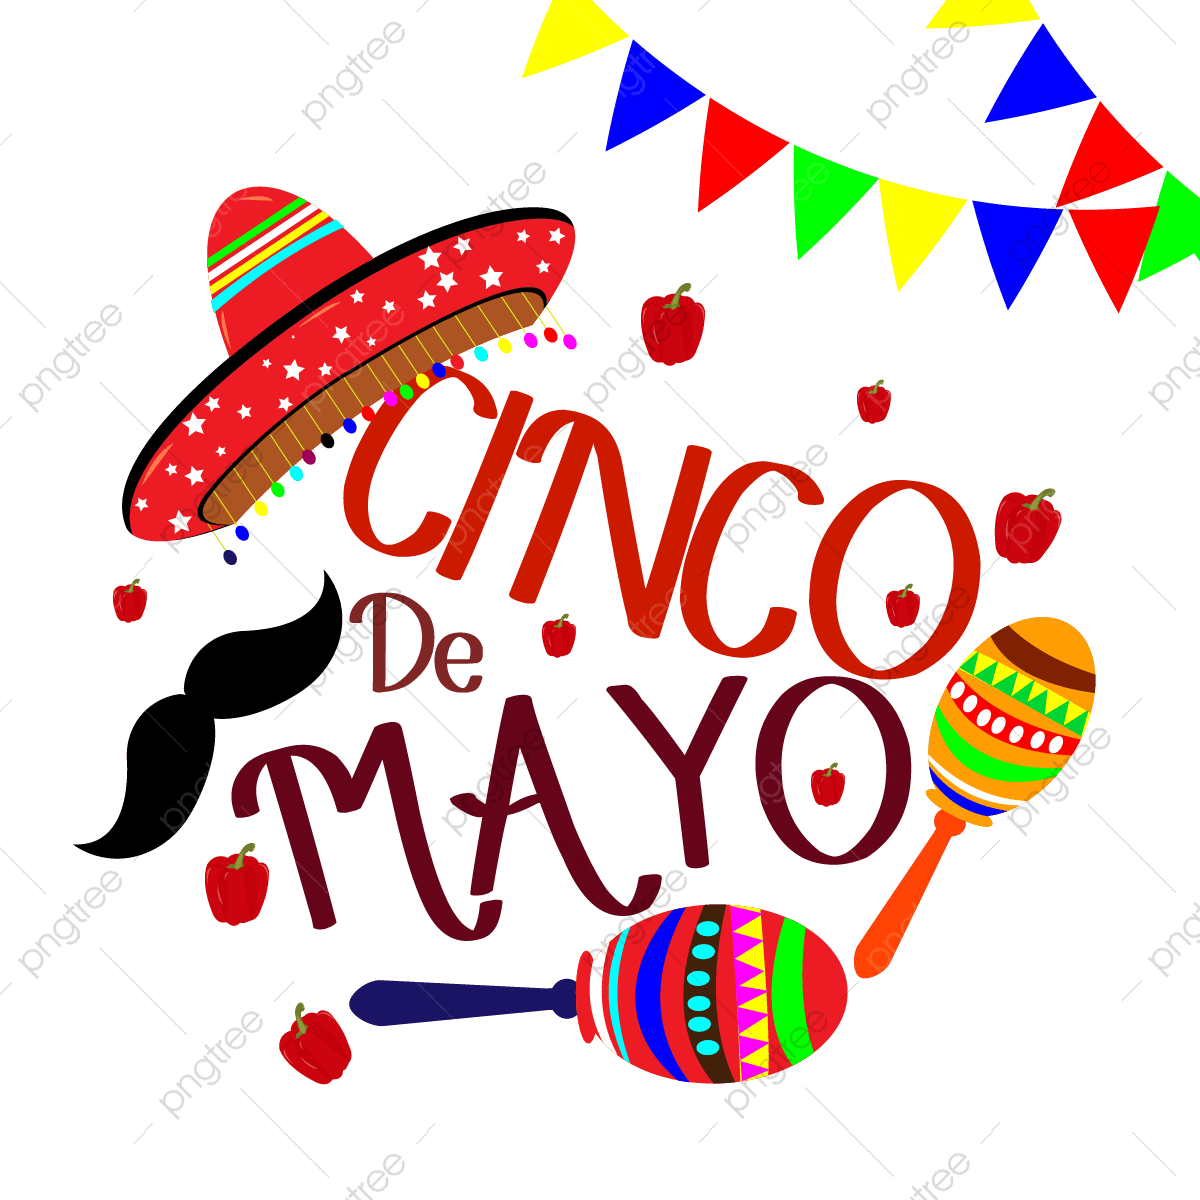 Mexican banner clipart images free download png transparent background